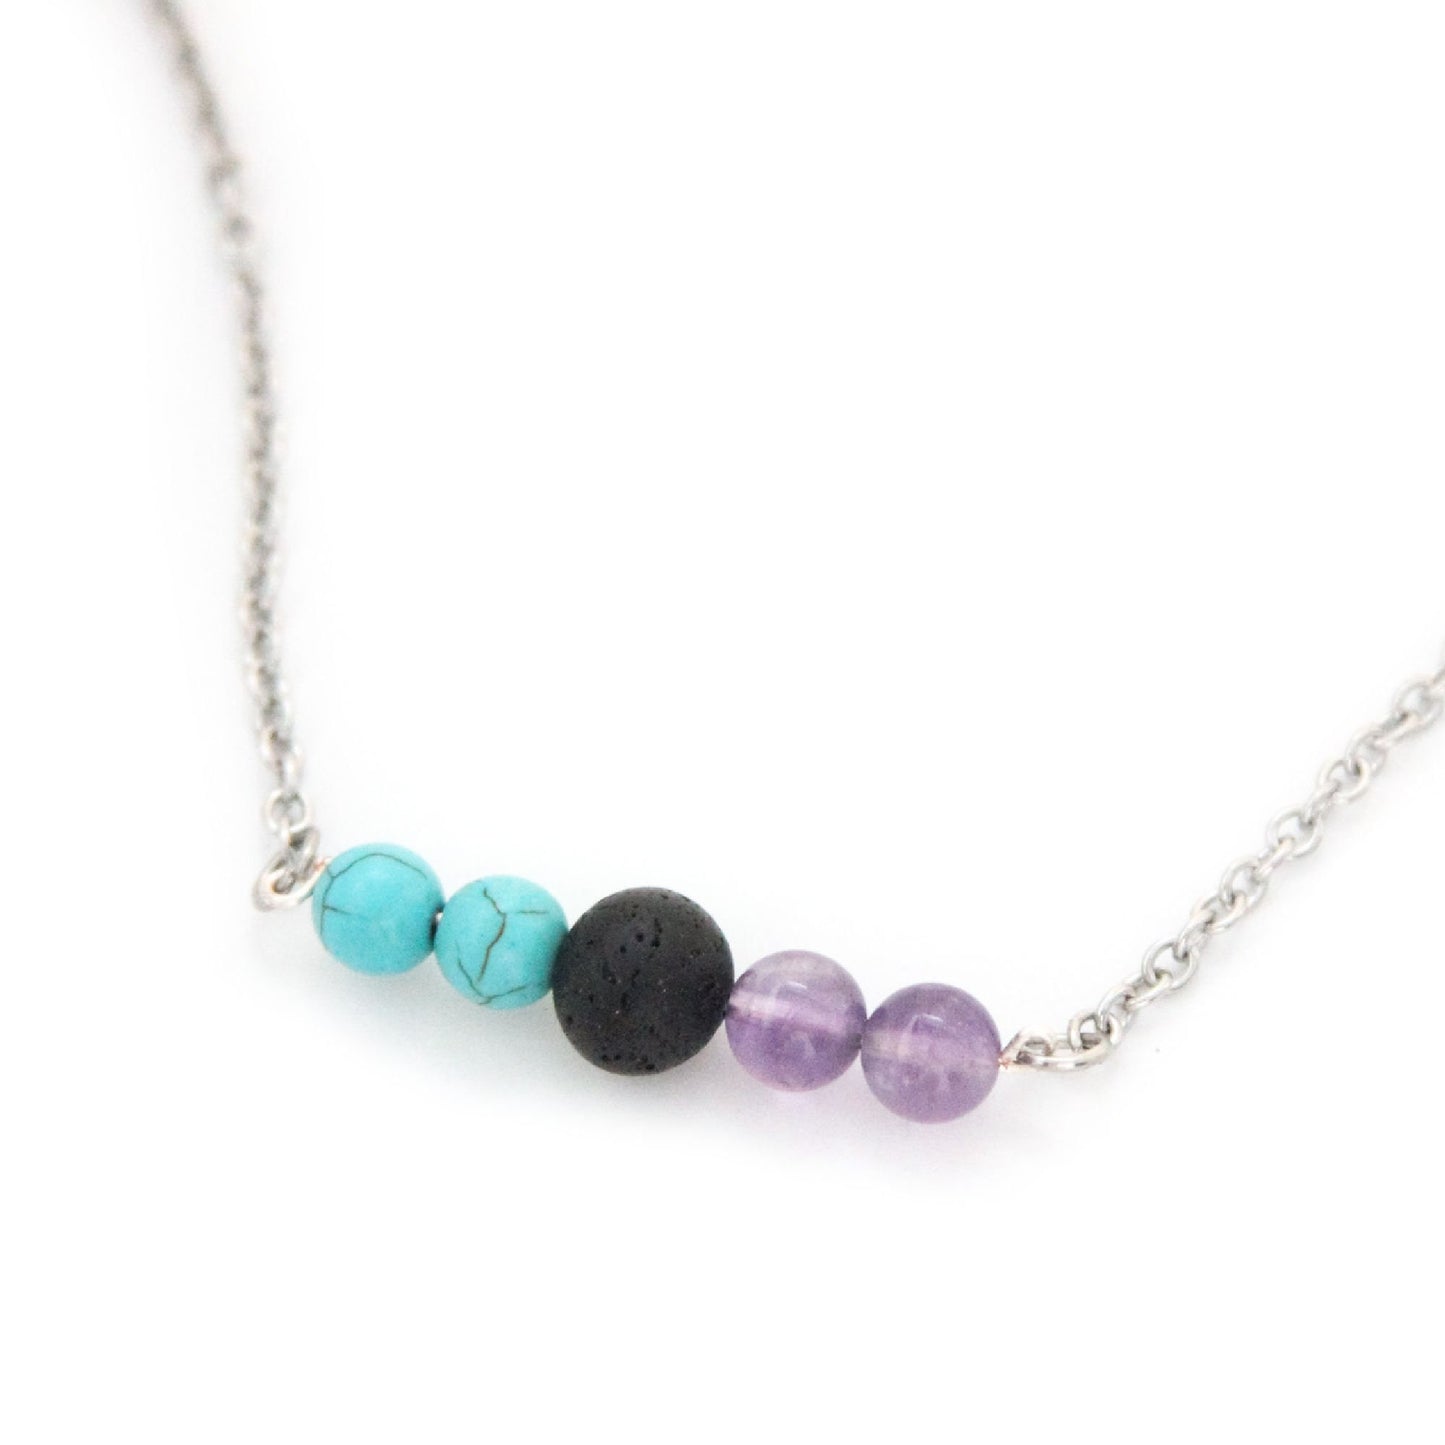 Suicide Awareness Diffuser Necklace with Amethyst & Turquoise Howlite